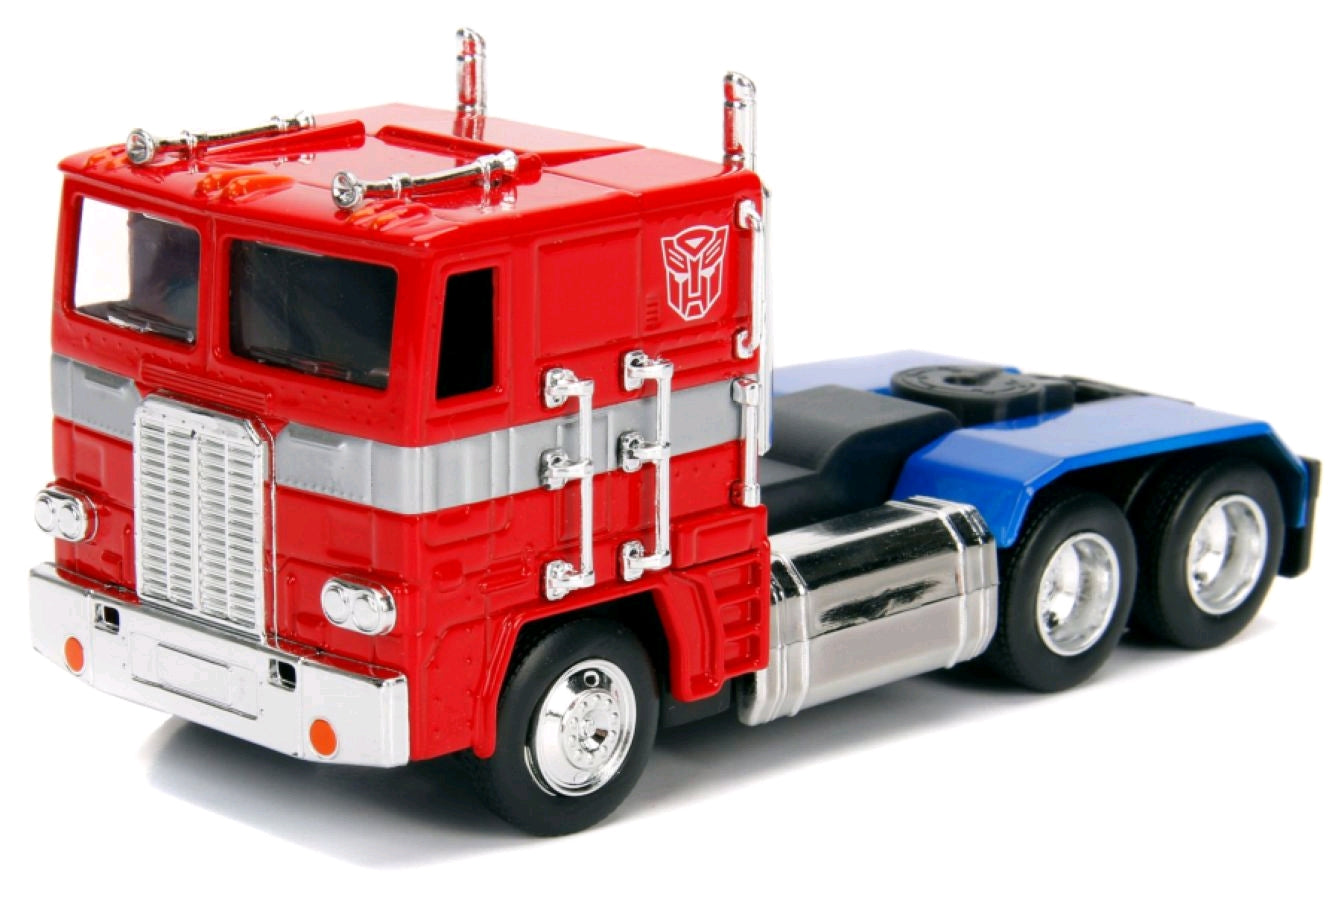 Transformers - Optimus Prime 1:32 Scale Hollywood Ride Diecast Vehicle